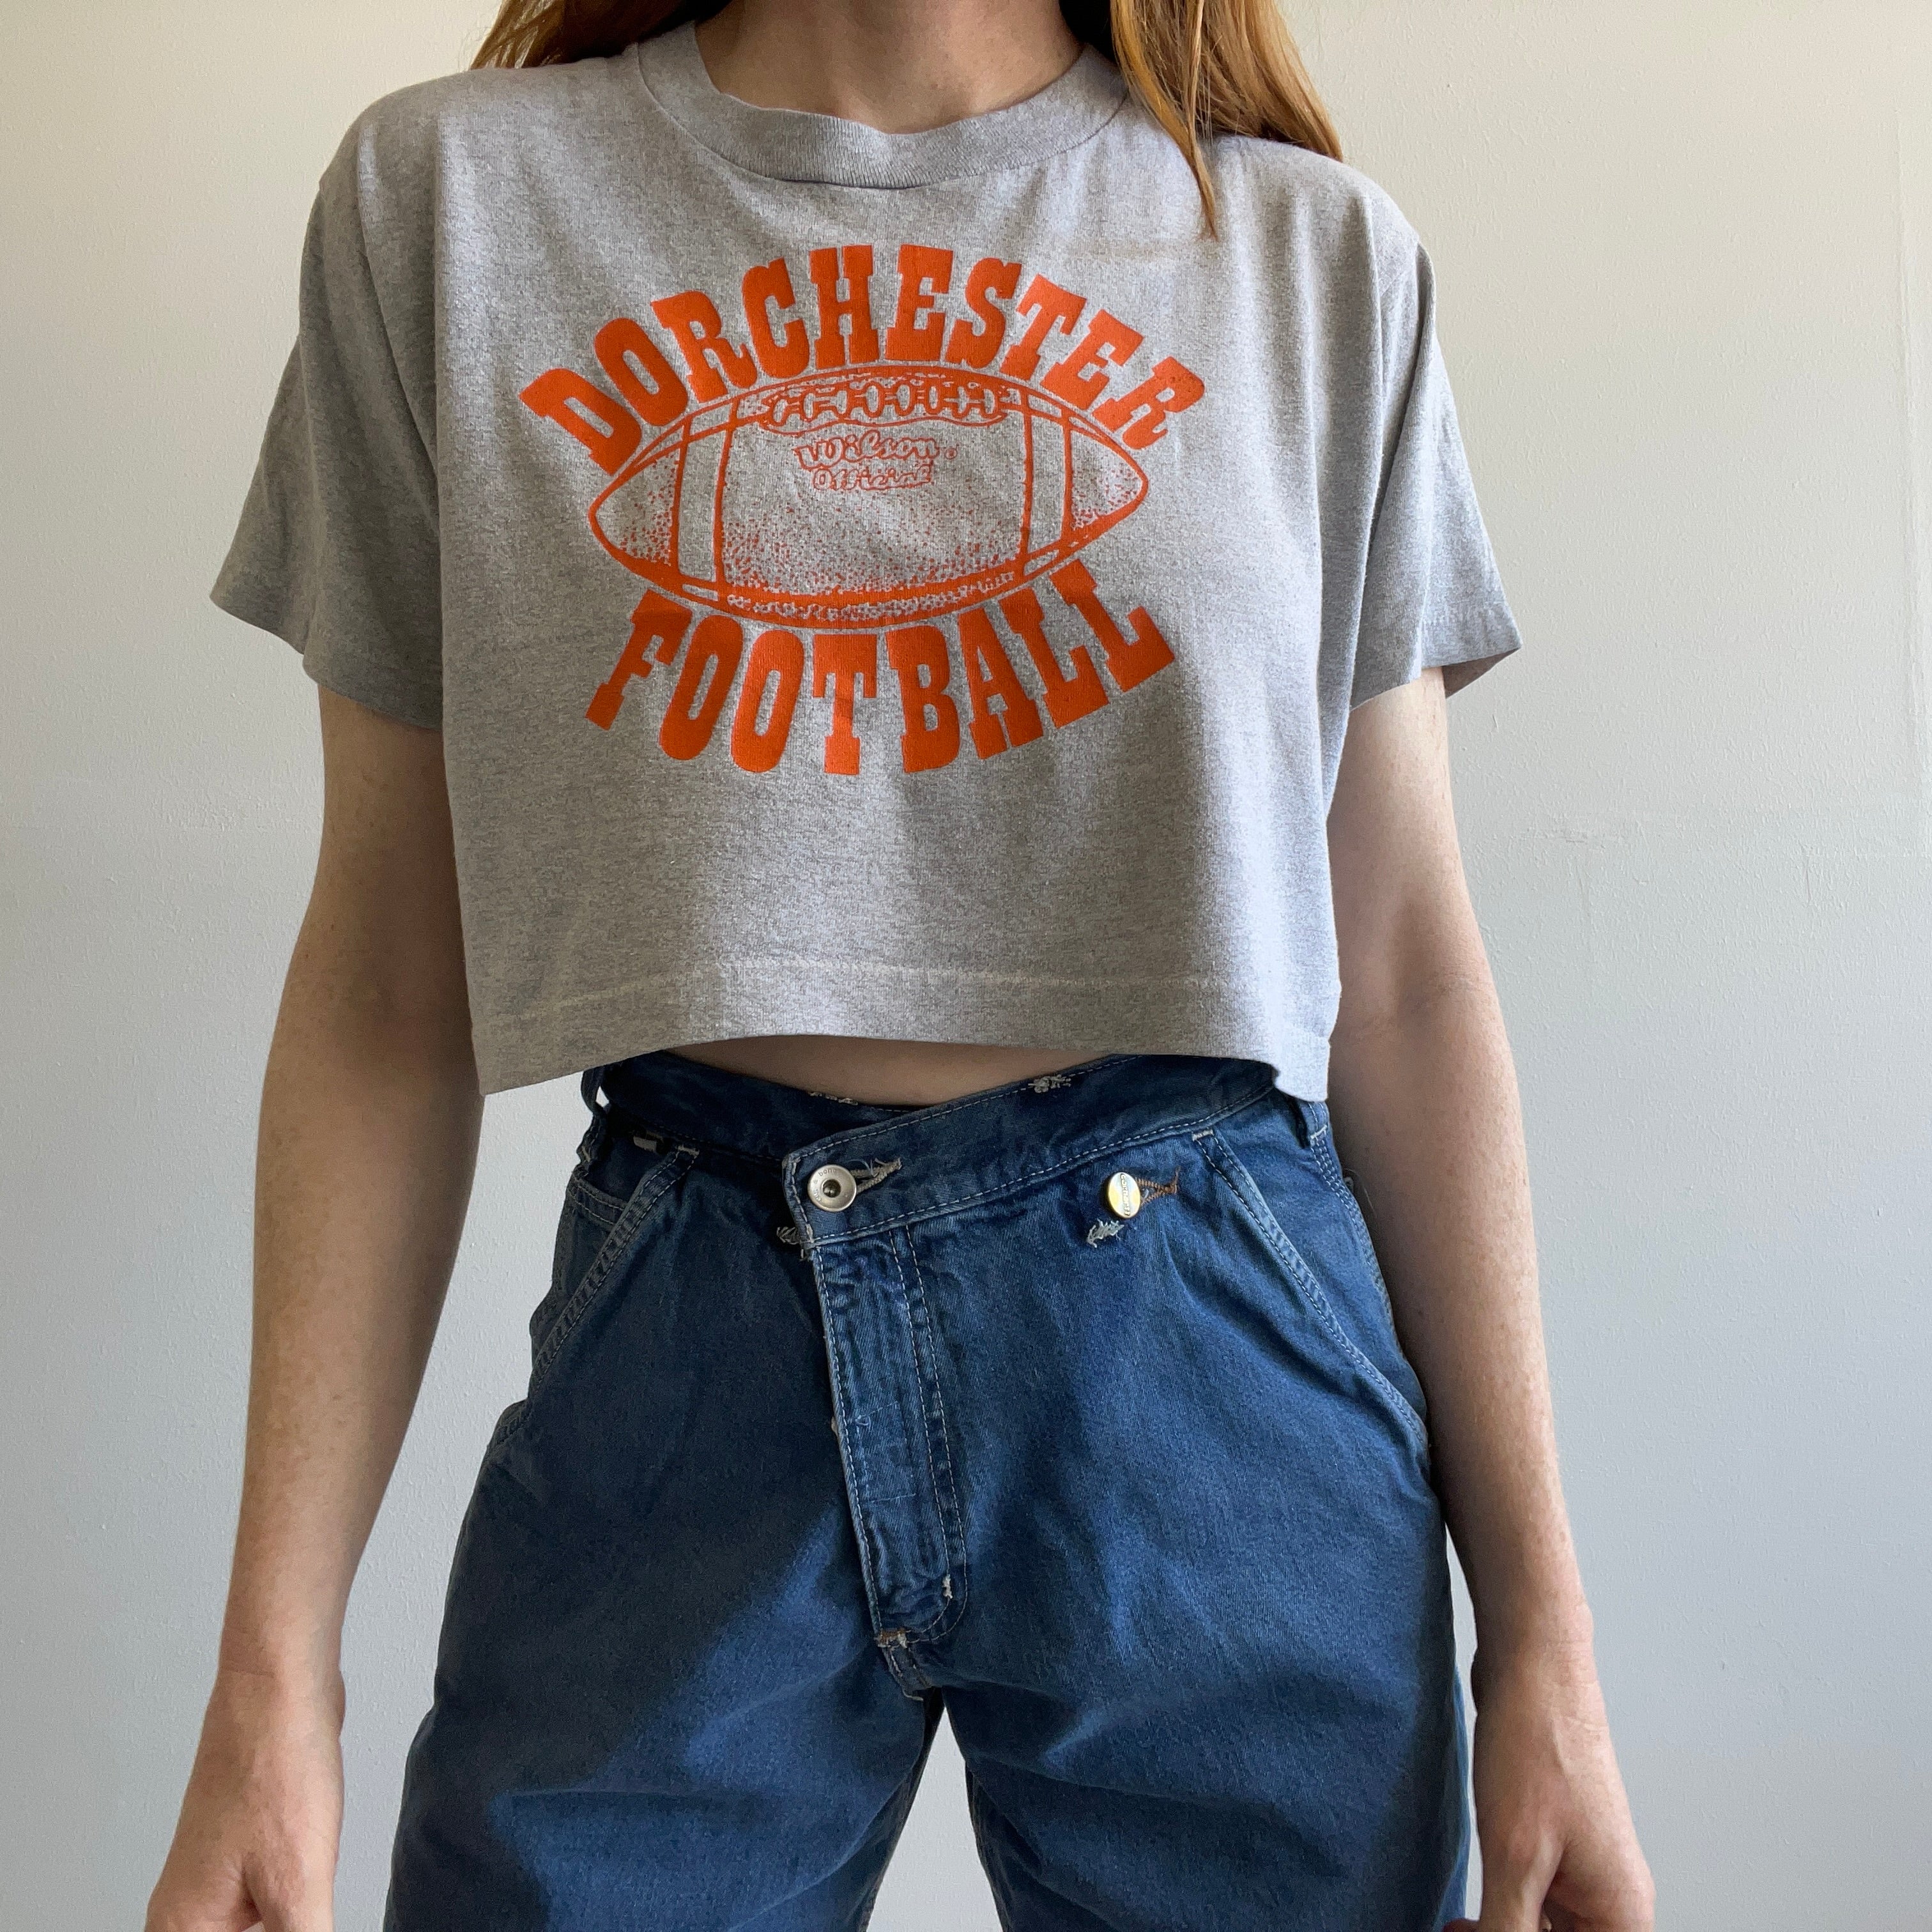 1980s Dorchester Football Crop Top by Screen Stars